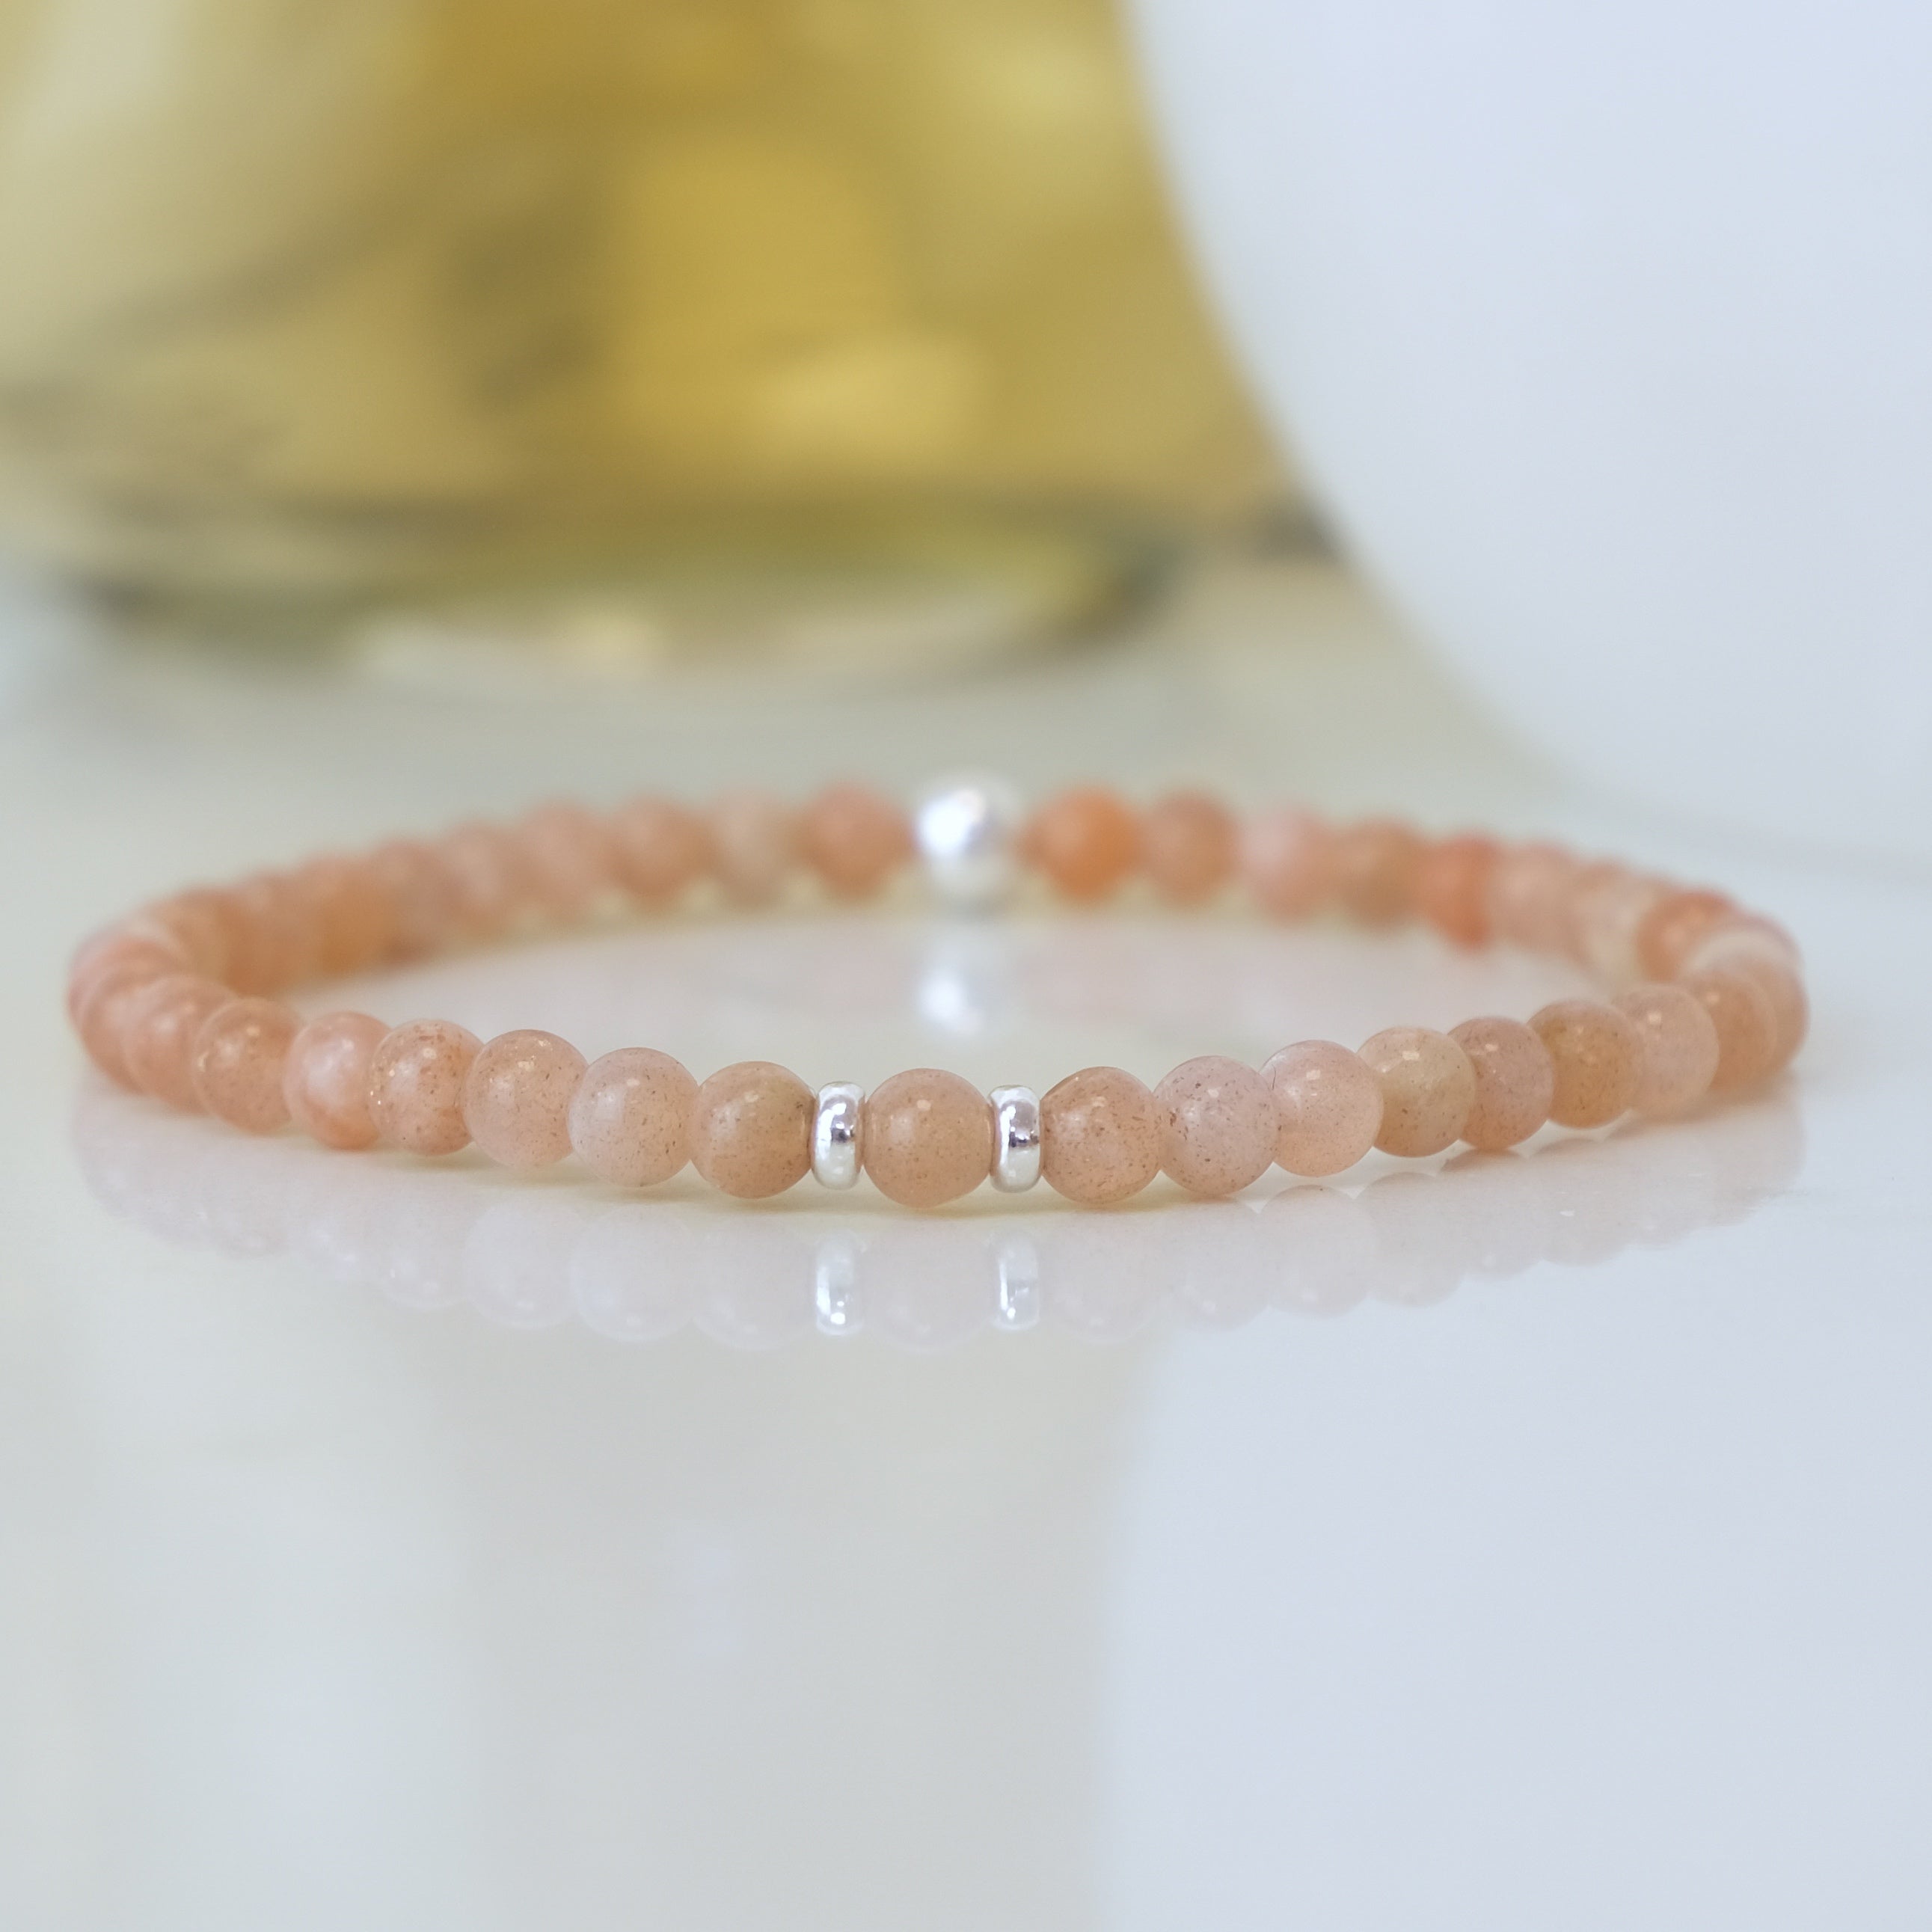 Sunstone gemstone bracelet in 4mm beads with Silver accents 